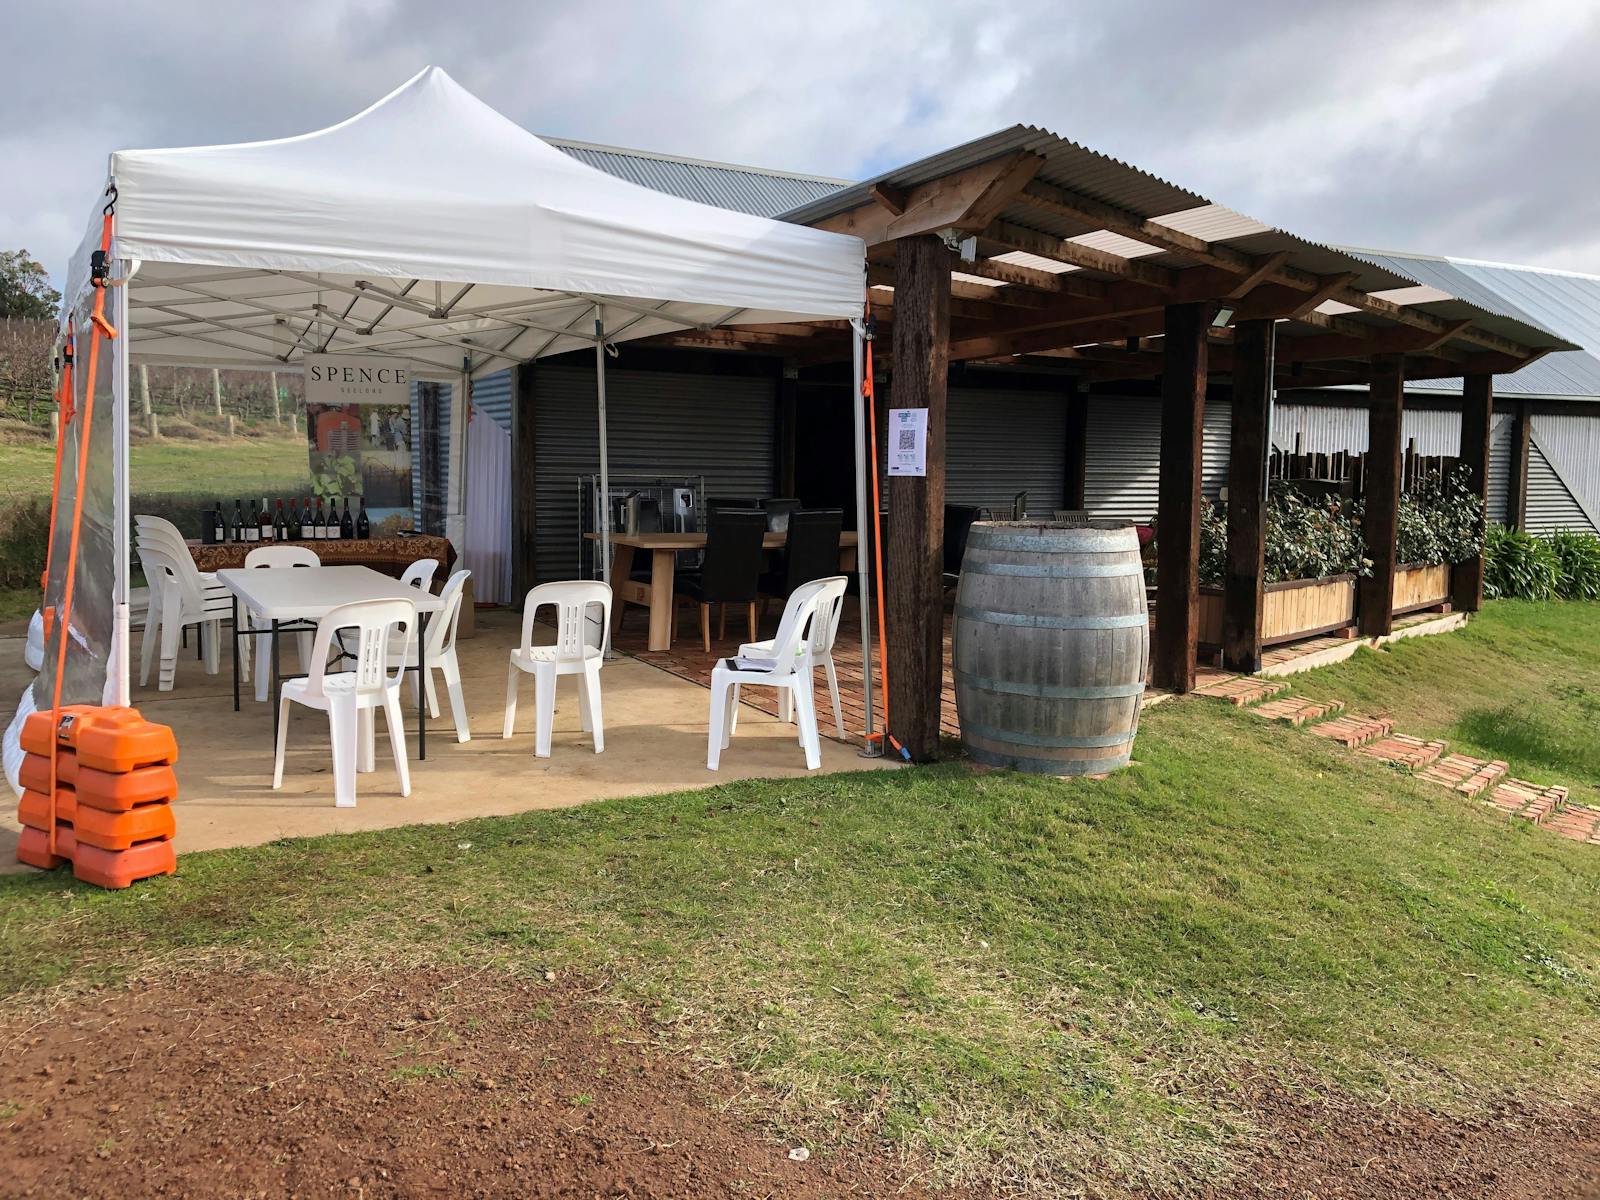 Spence Wines Cellar door ready for a busy weekend